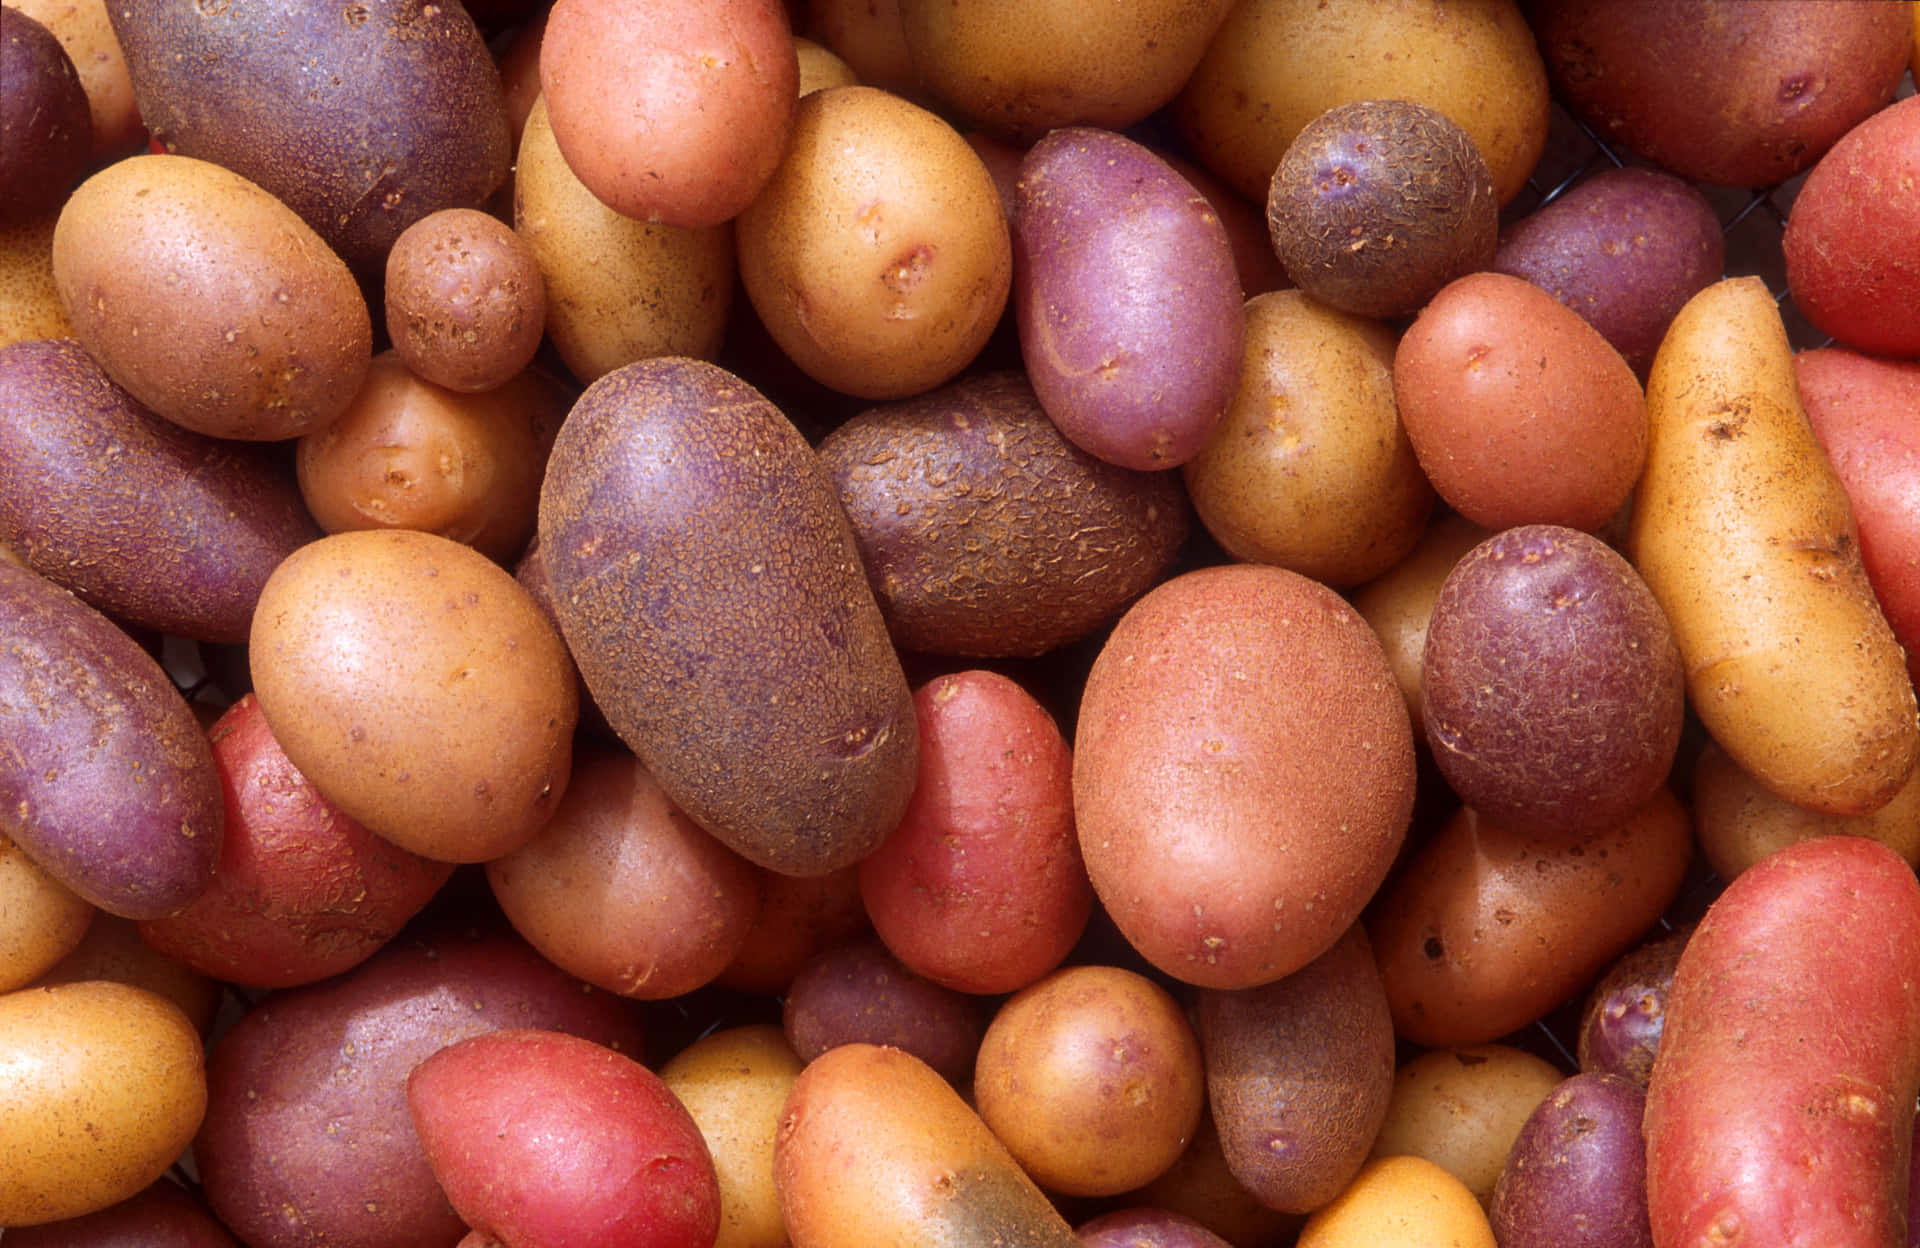 A freshly-harvested and delicious potato, ready to be cooked.